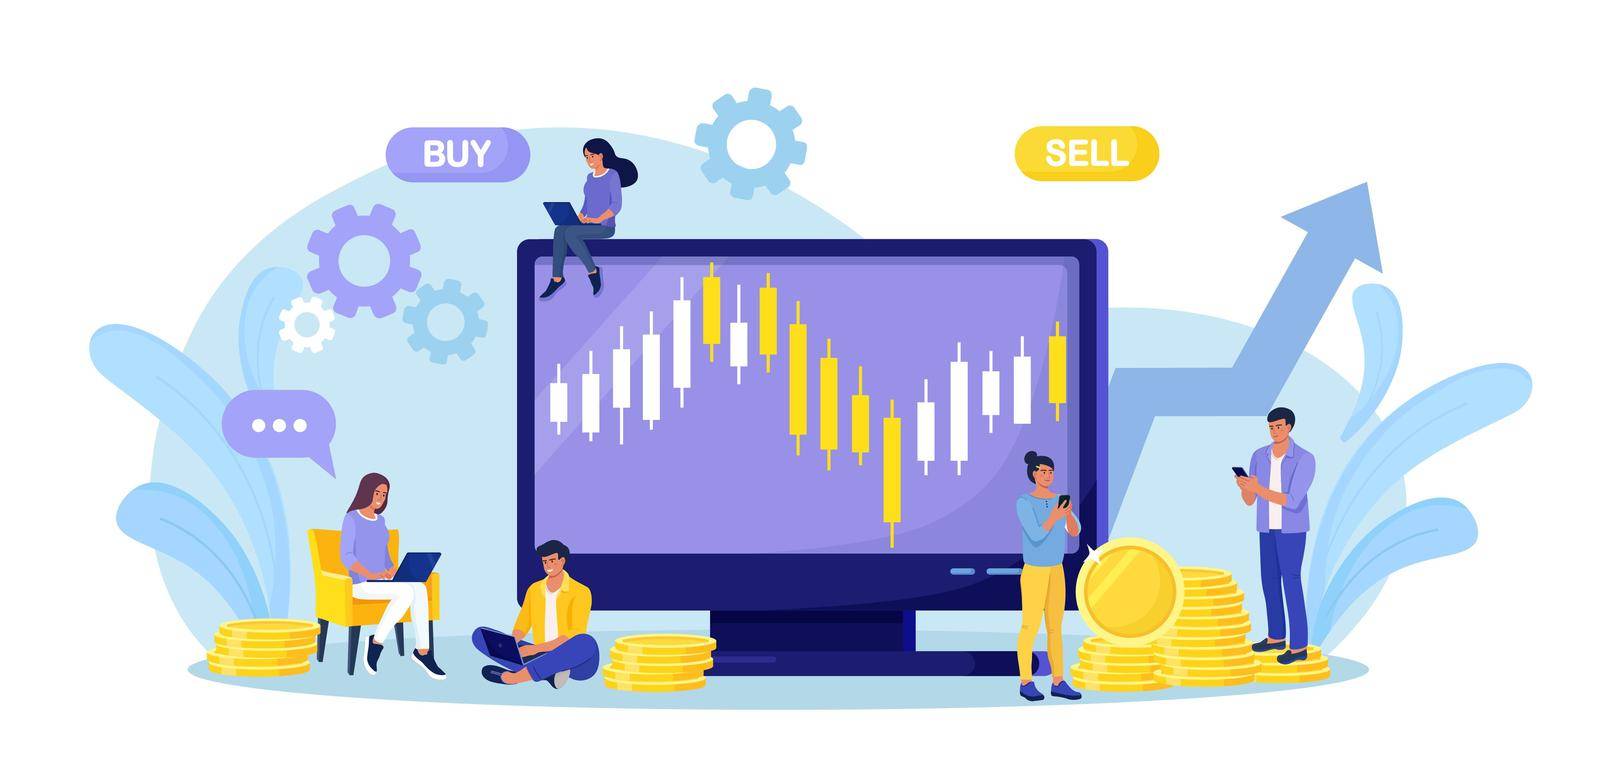 Tiny people stock traders buy and sell shares at computer. Technical analysis candlestick chart. Global stock market index, trade exchange. Forex trading strategy. Investing in Stocks